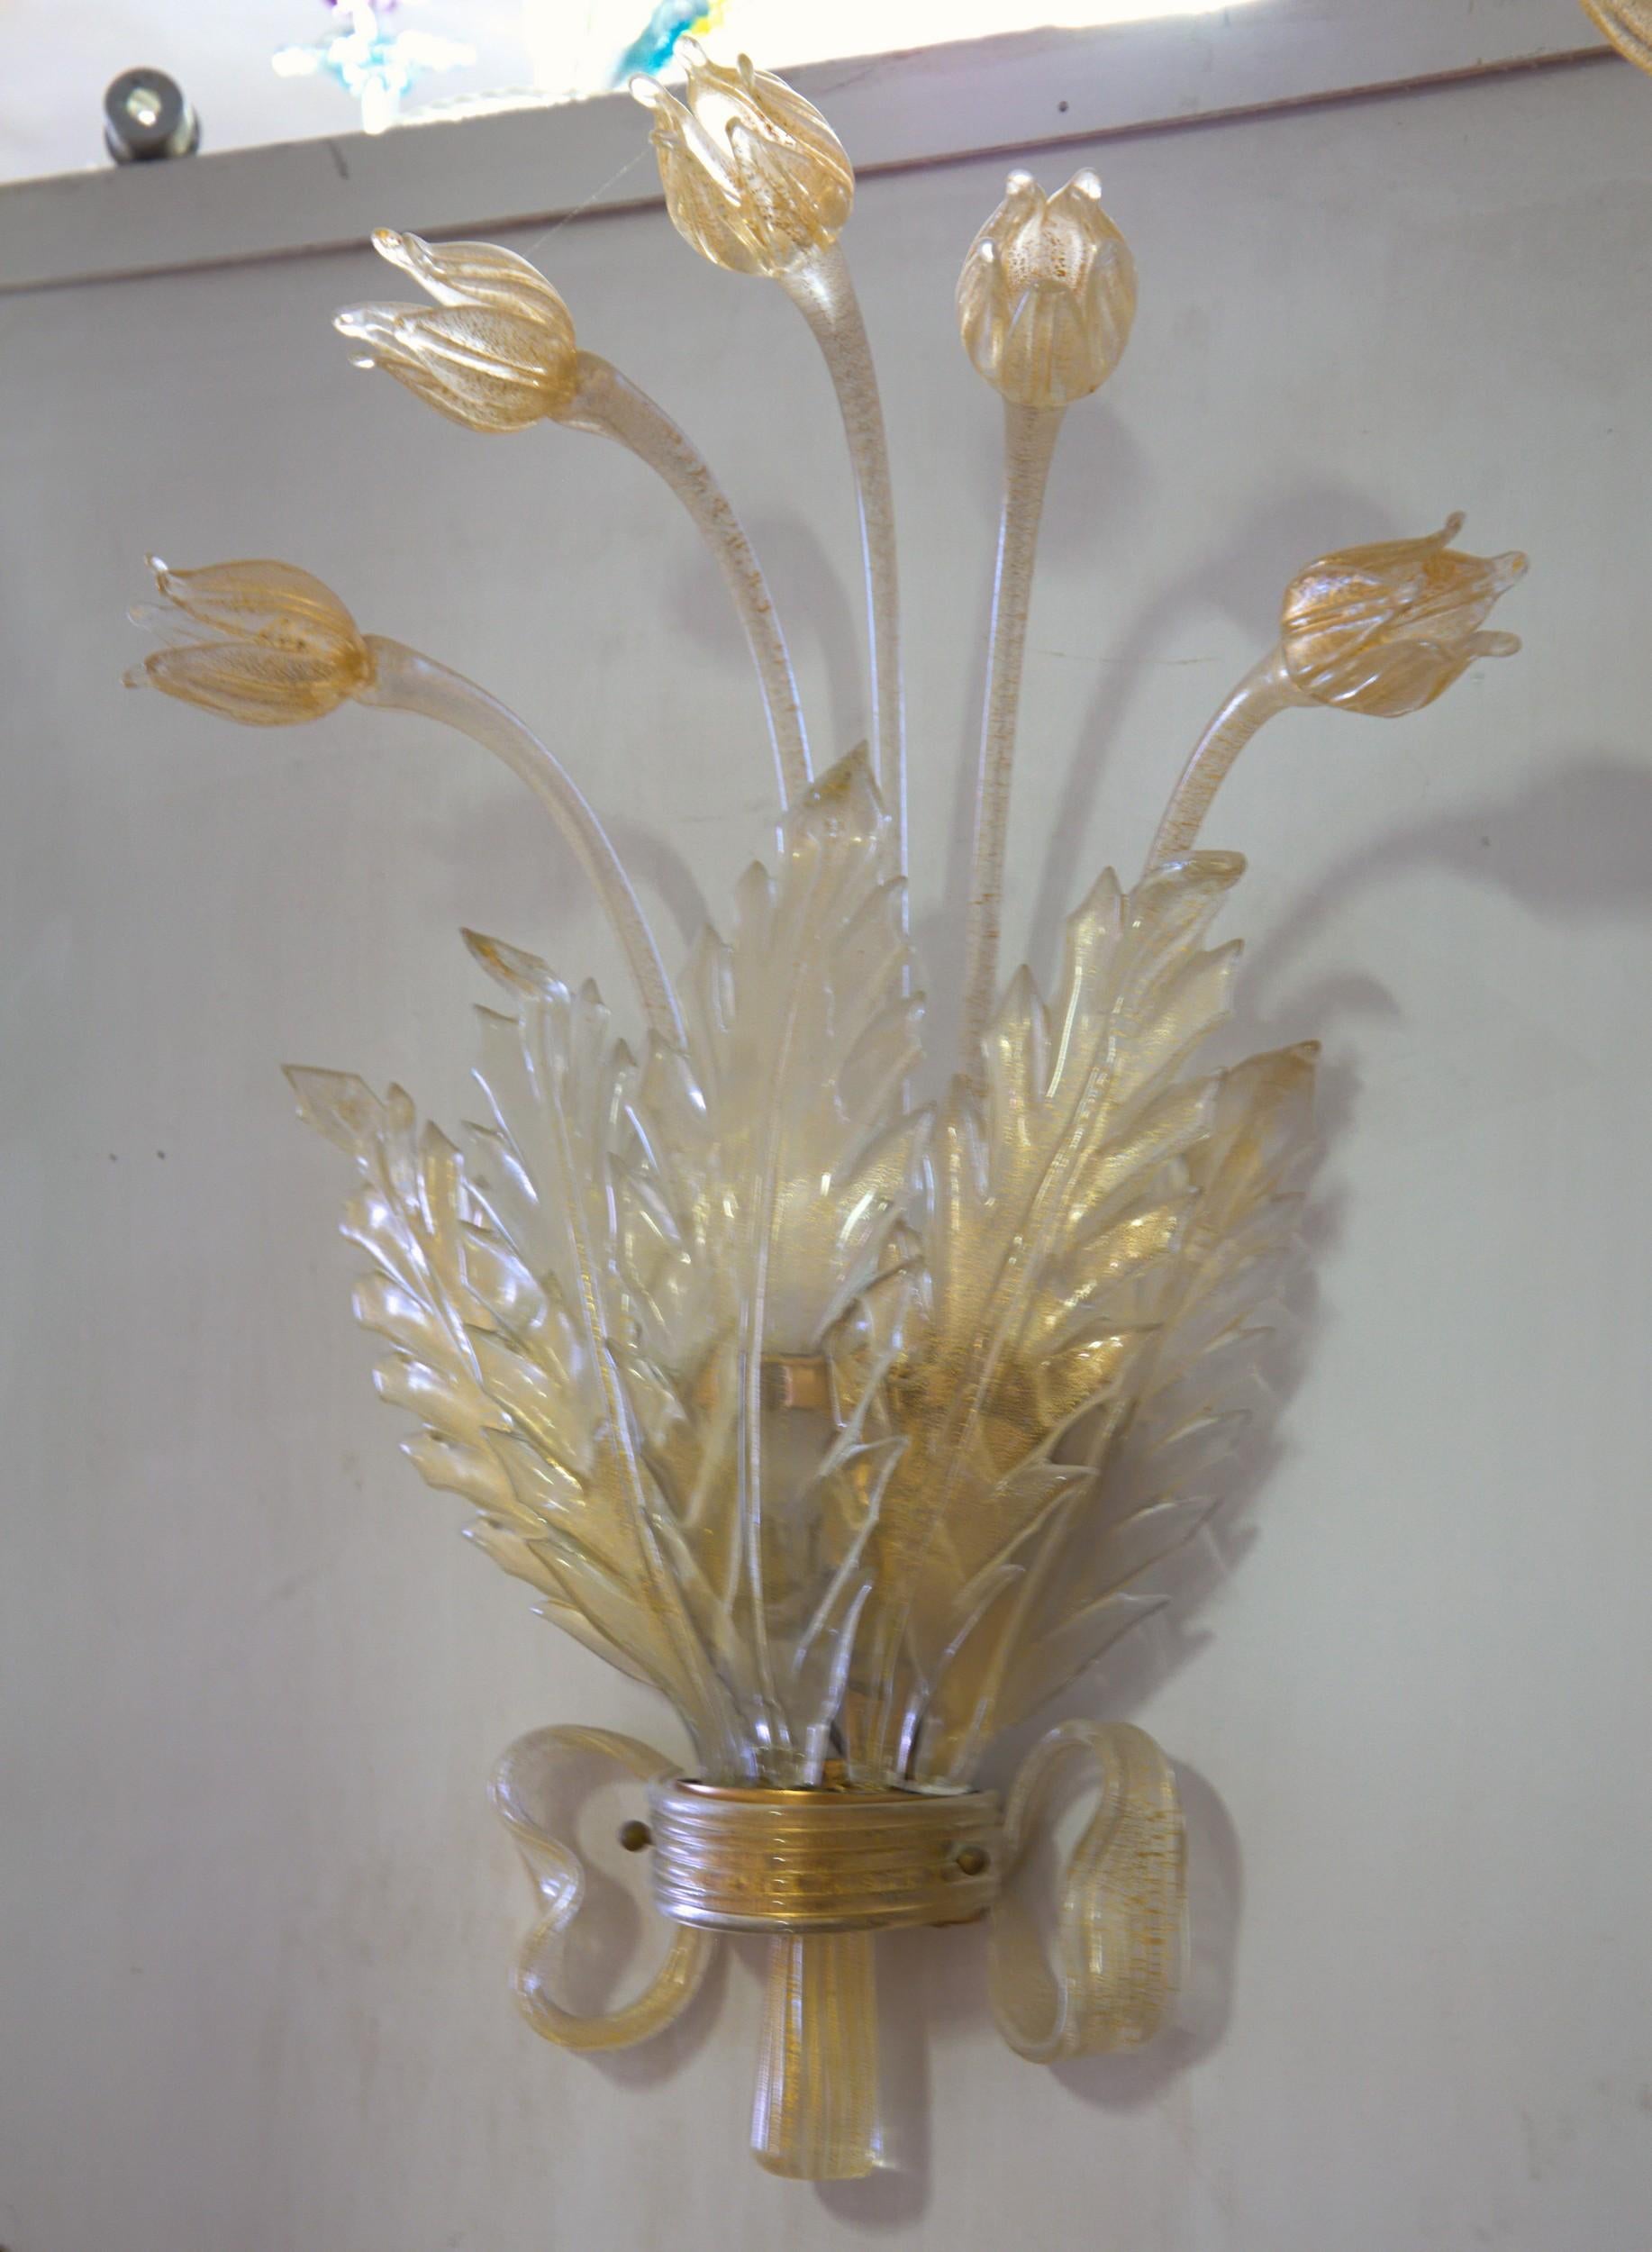 Pair of luxury detailed and elaborated sconces.
Sconce has the hardware covered by a glass ribbon and hosts 5 hand shaped leaves and 5 tulips.
The base is ornate with a bow resembling glass ribbon.
Attributed to Seguso Vetri d'Arte from the